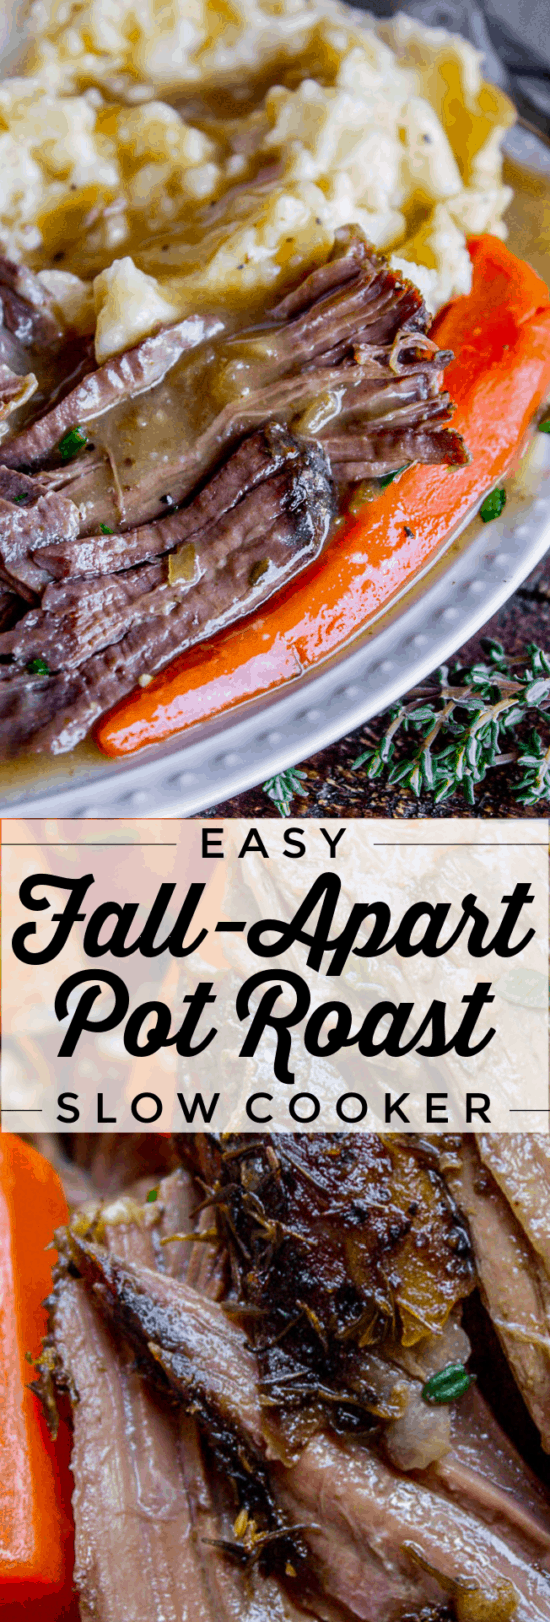 Easy Slow Cooker Pot Roast - Keeping On Point